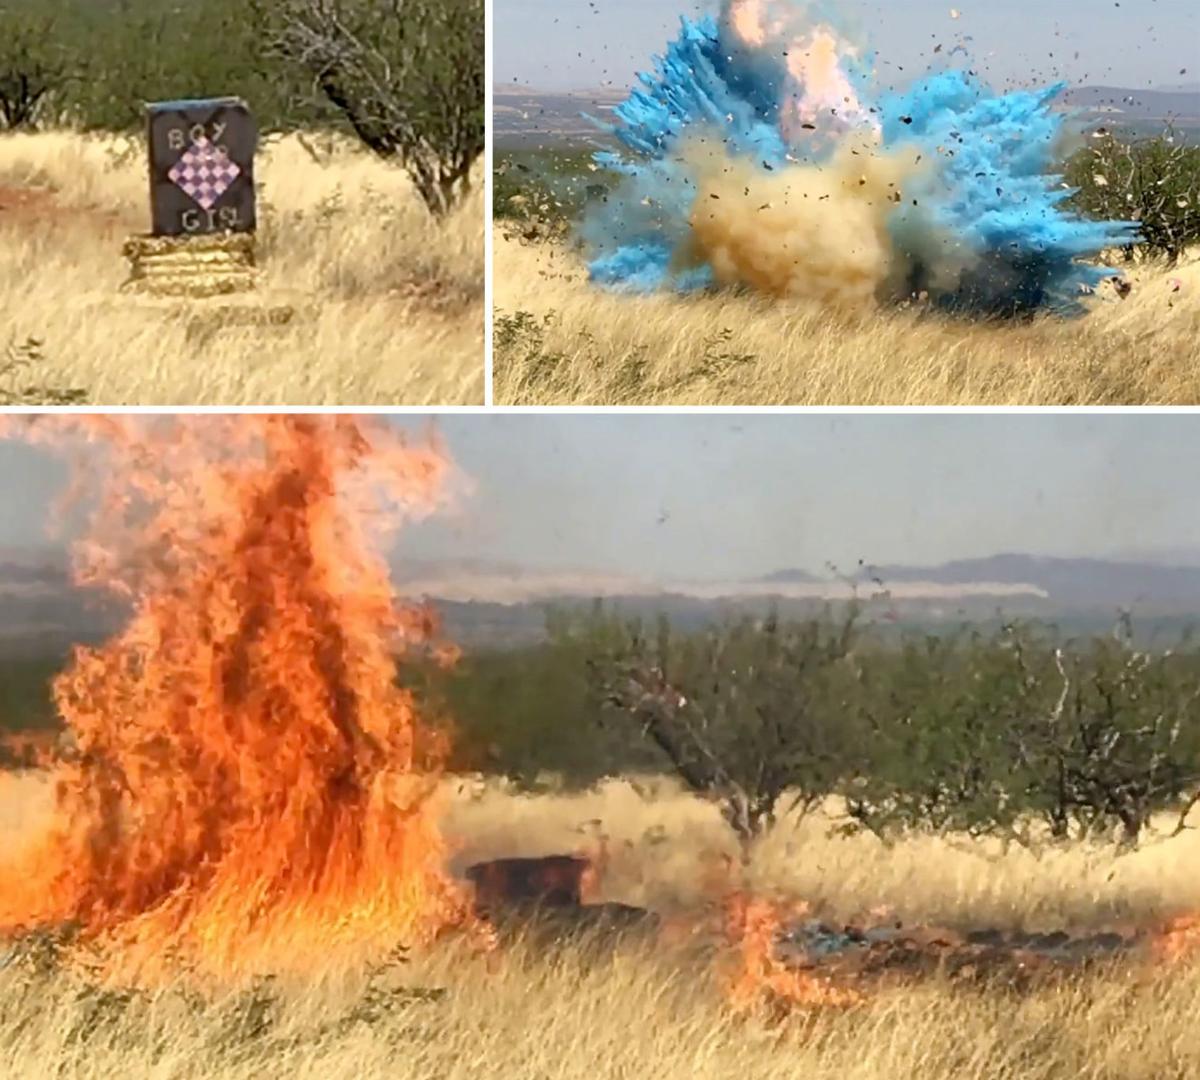 Watch Explosion At Border Agents Gender Reveal Party That Sparked Huge Arizona Wildfire